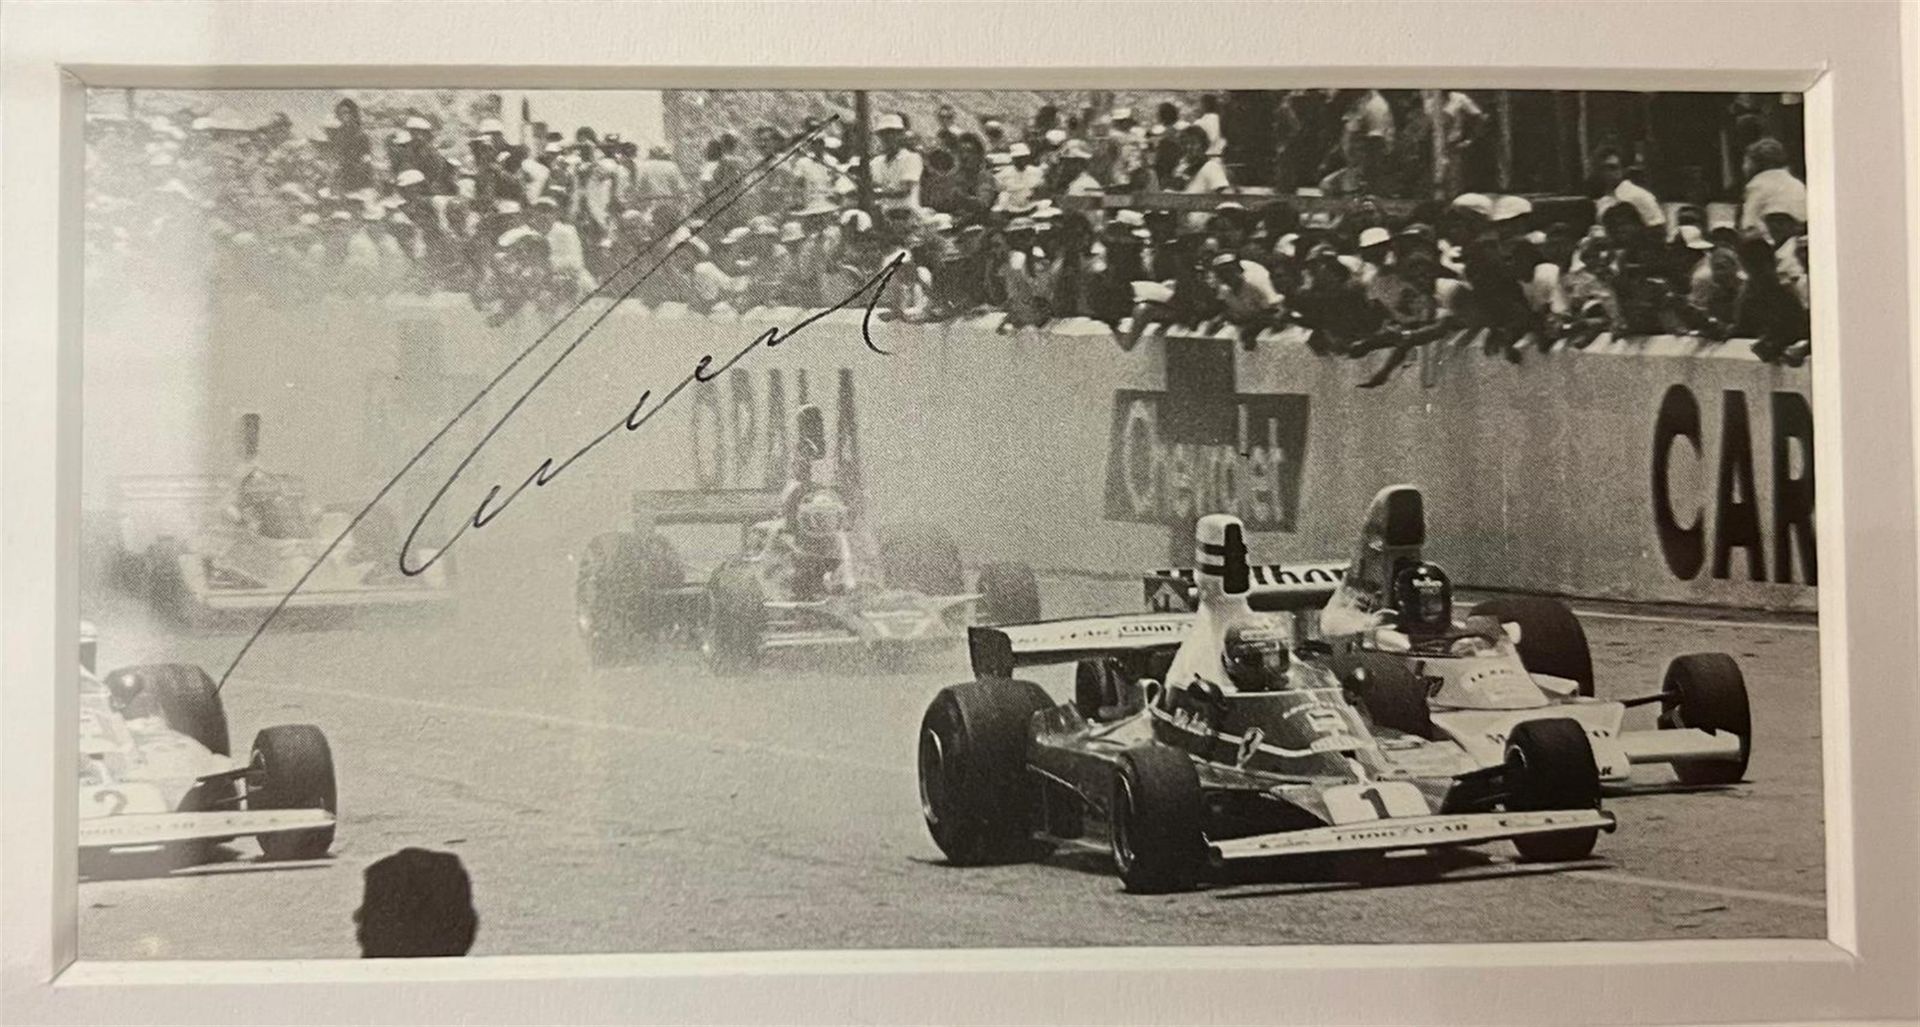 Lauda v Hunt Framed Production with signed B/W images of Both Drivers - Image 2 of 5